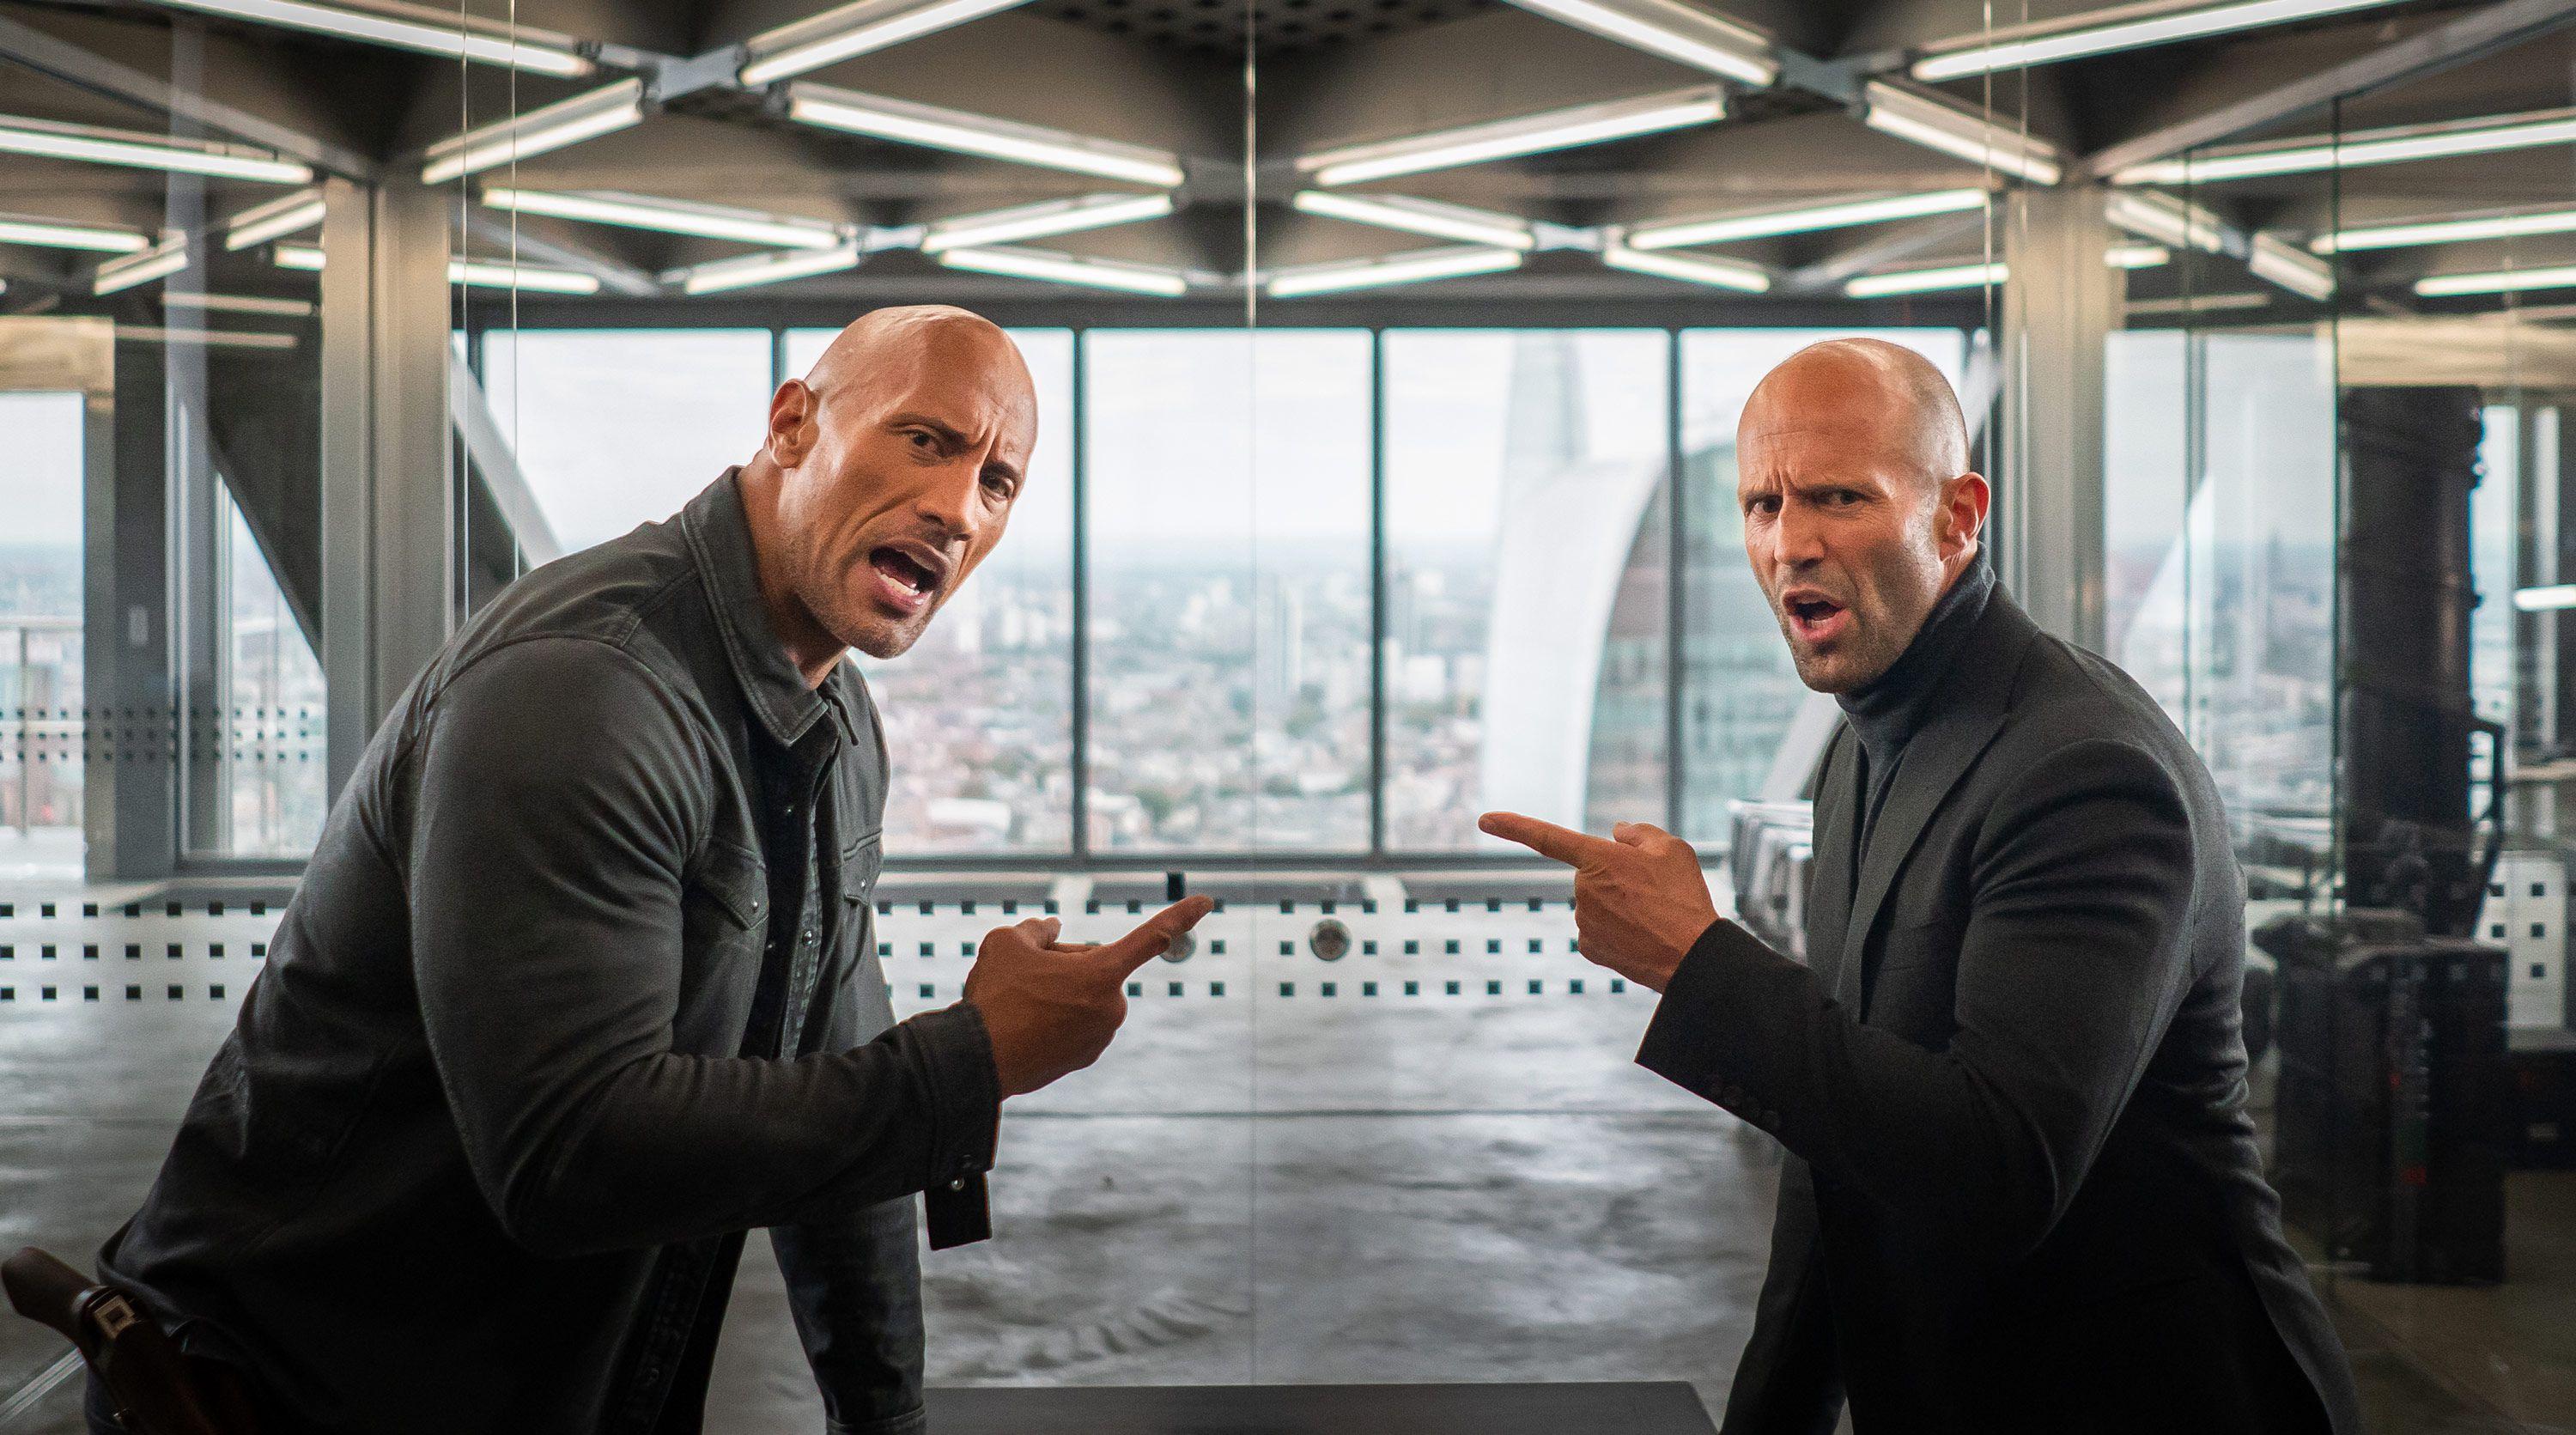 Hobbs and Shaw cast, trailer, release date and plot